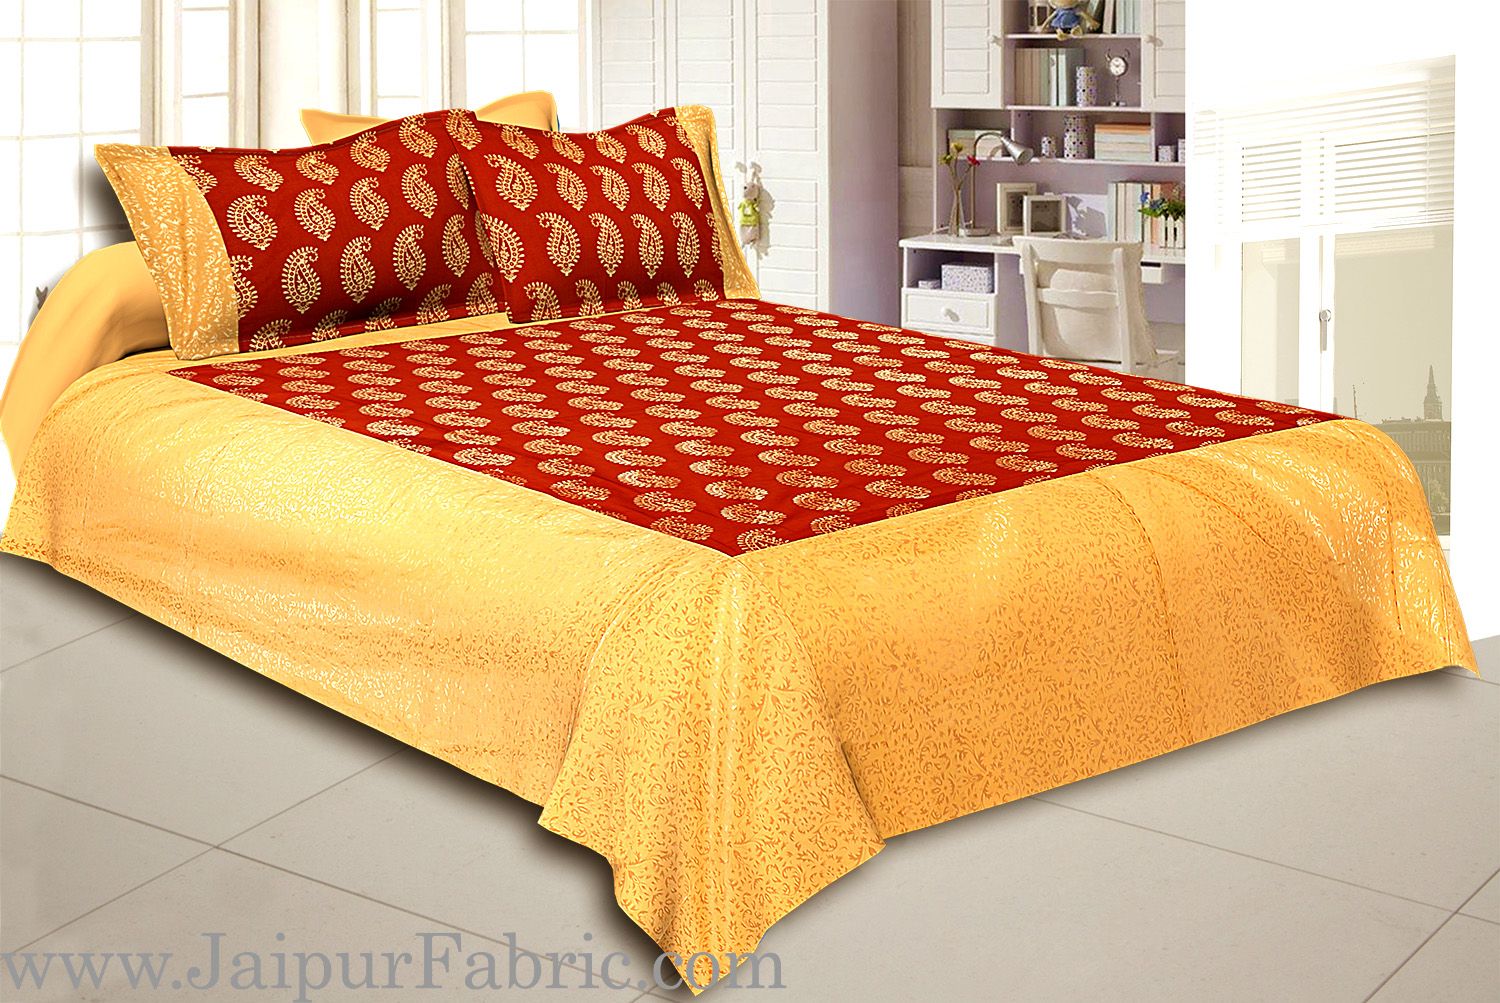 Cream Broad Border With Shining Gold Print Red  Base Gold Kerry Pattern Super Fine Cotton  Double Bed Sheet